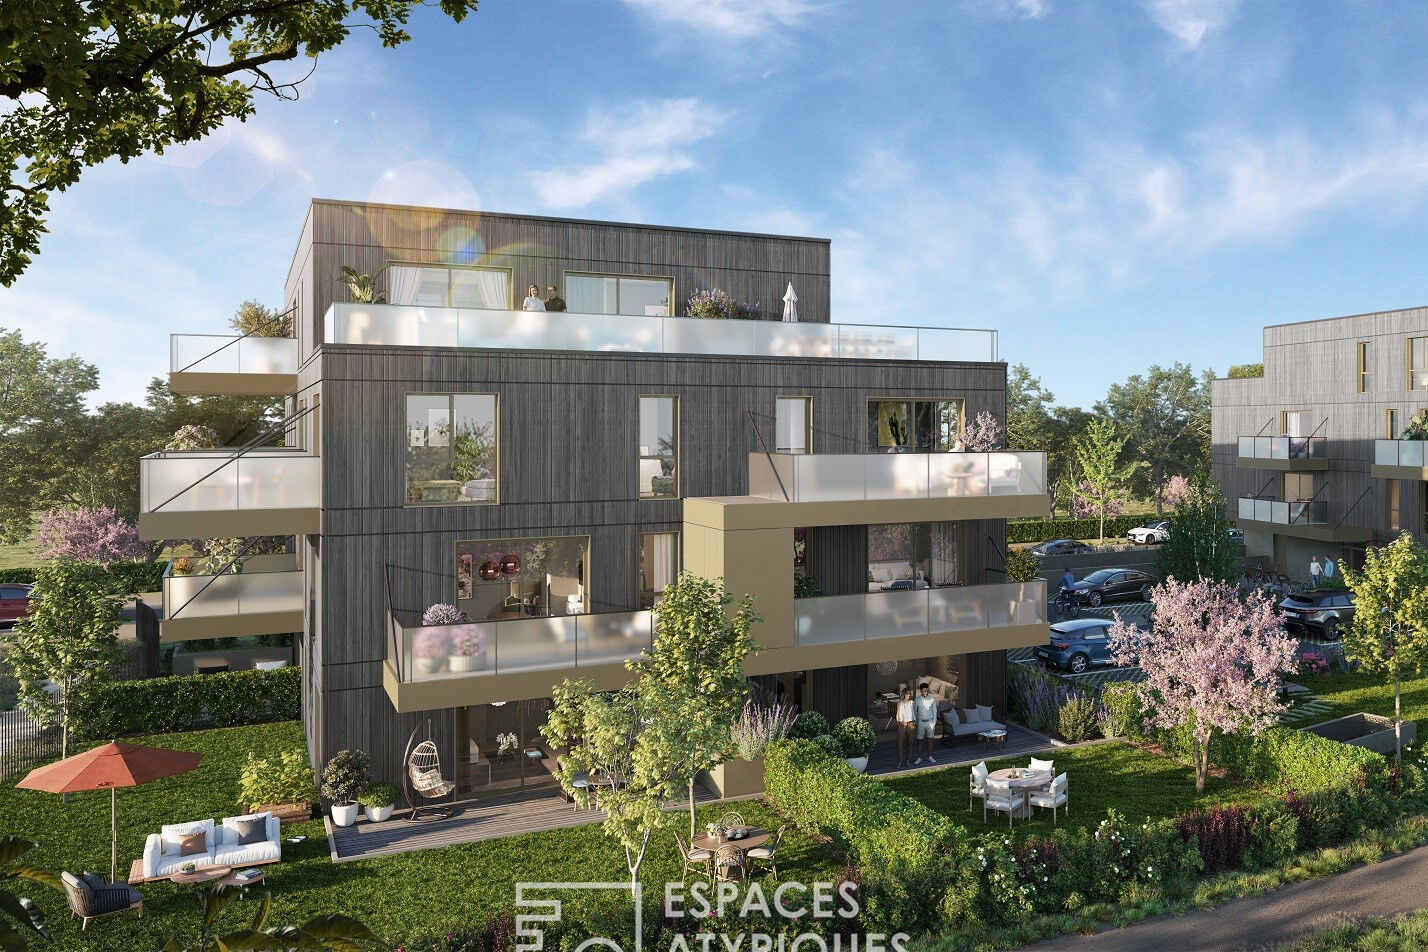 Penthouse and its terraces in an eco-responsible residence